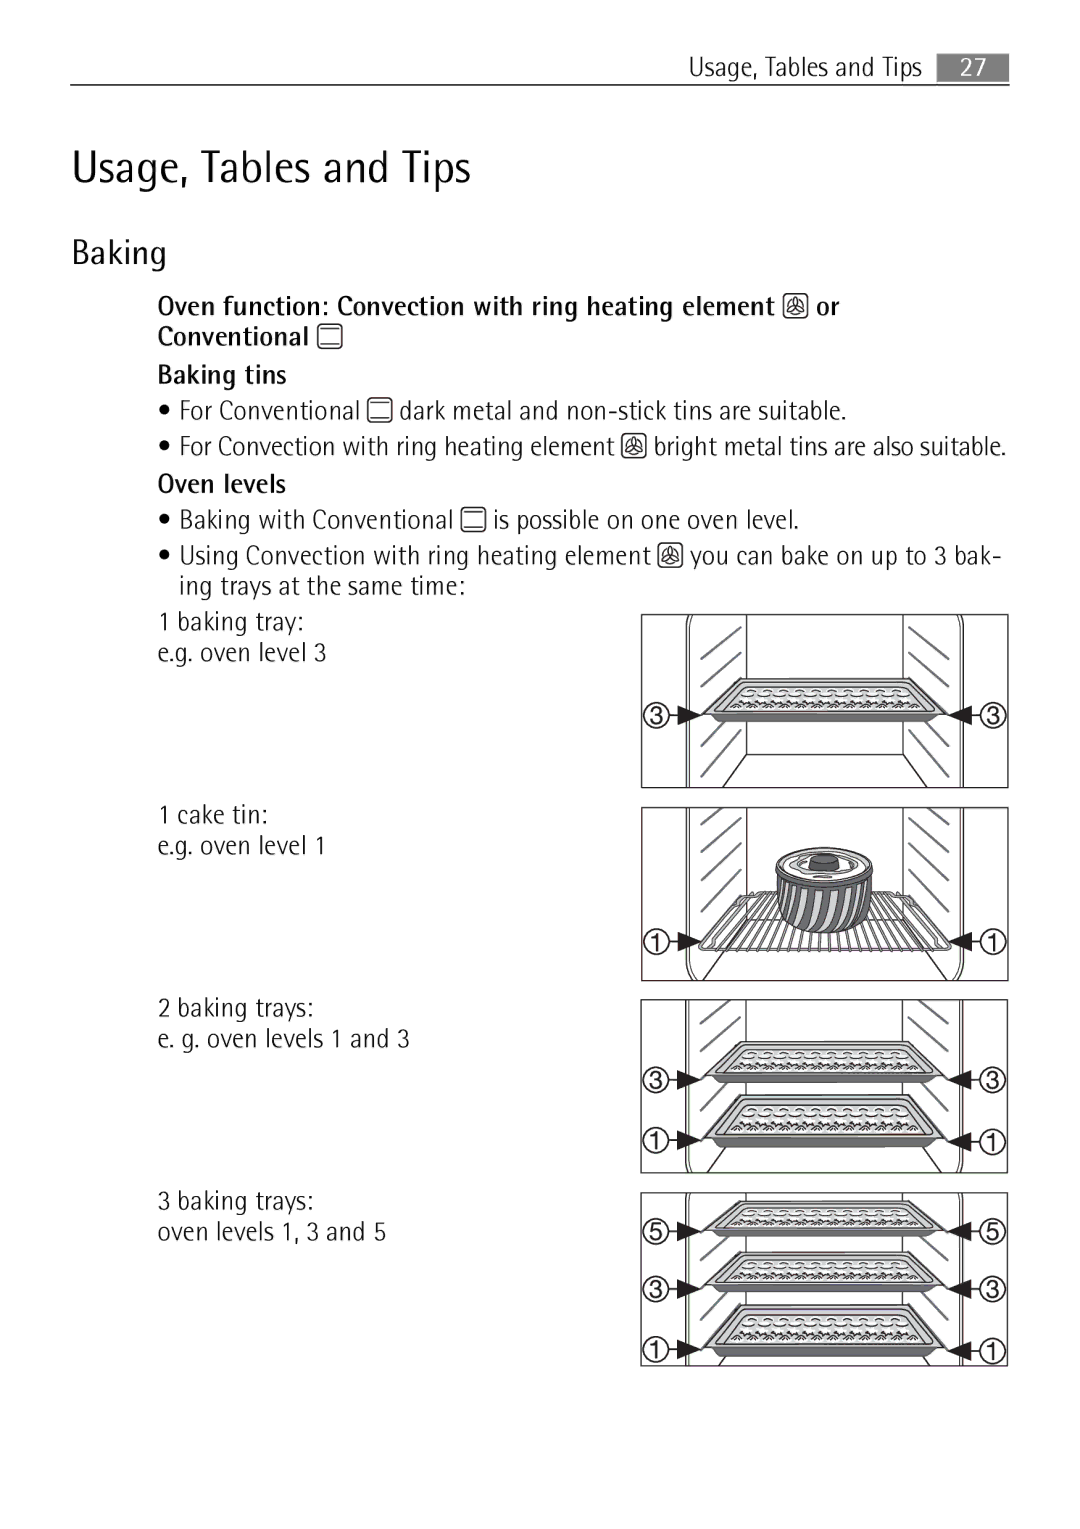 Electrolux B57415A, B57415B user manual Usage, Tables and Tips, Baking, Oven levels 